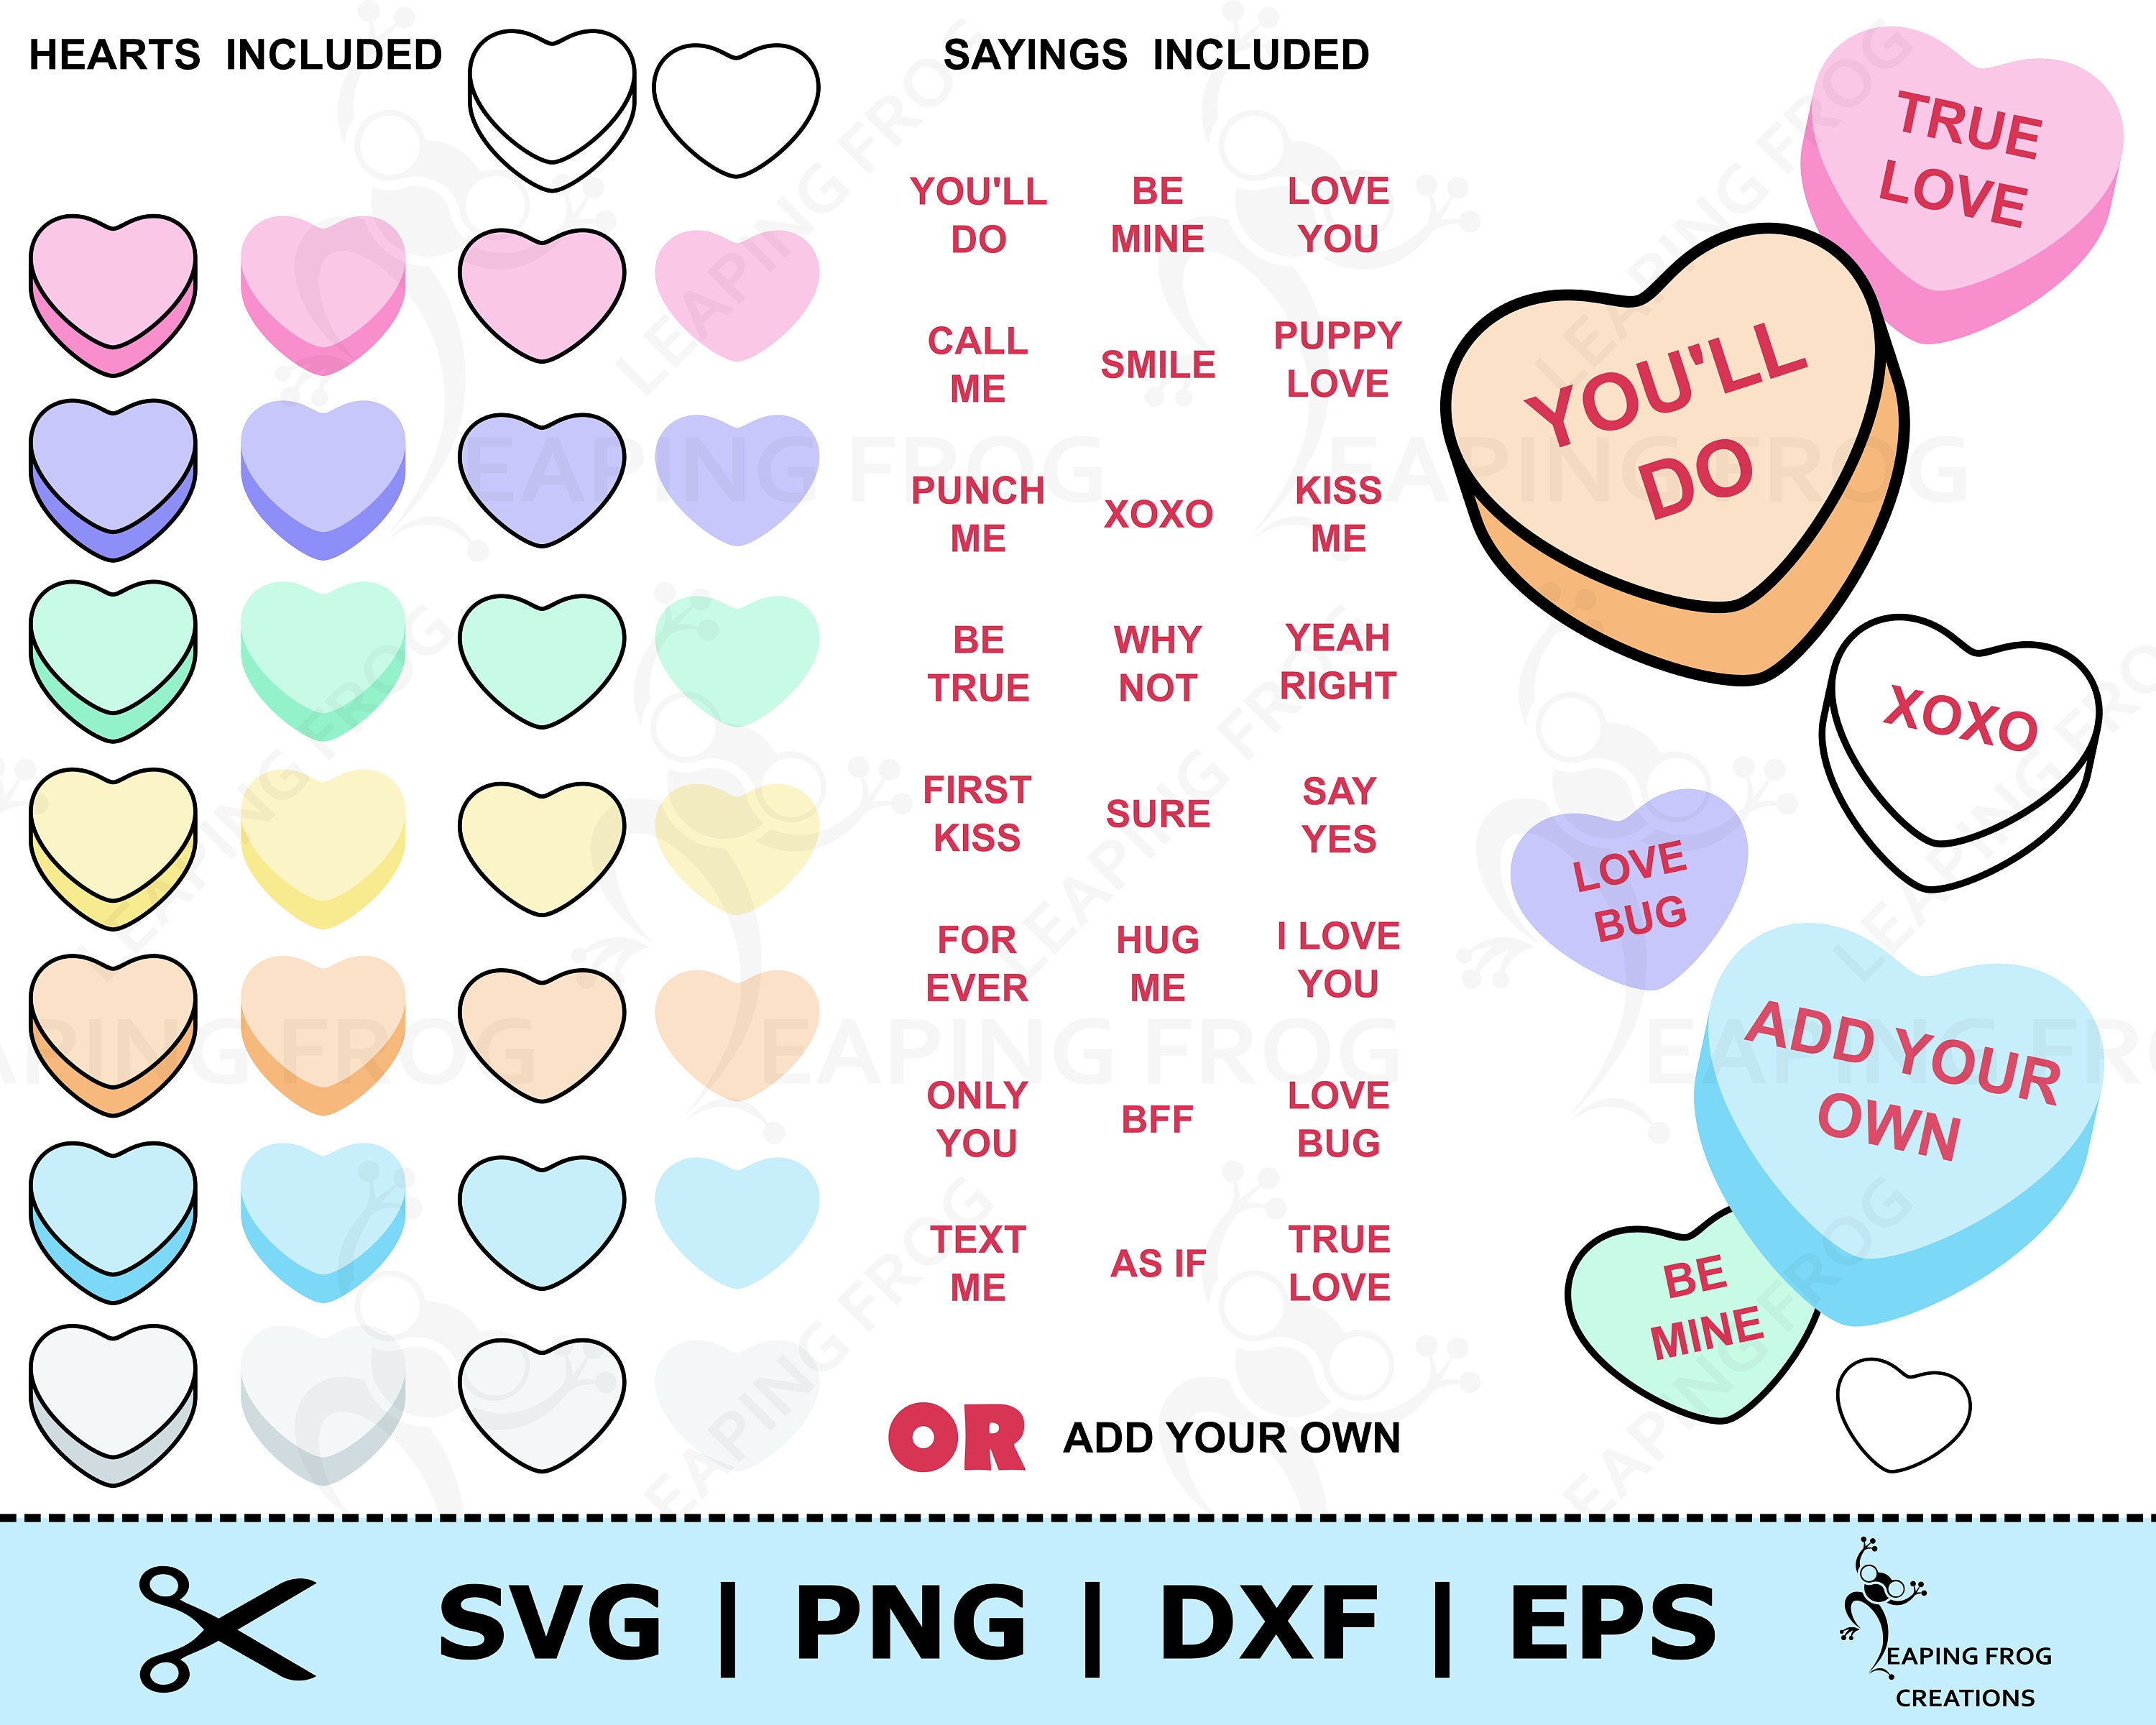 lllᐅDownload Girl Loves Silhouette Cameo SVG - best layered